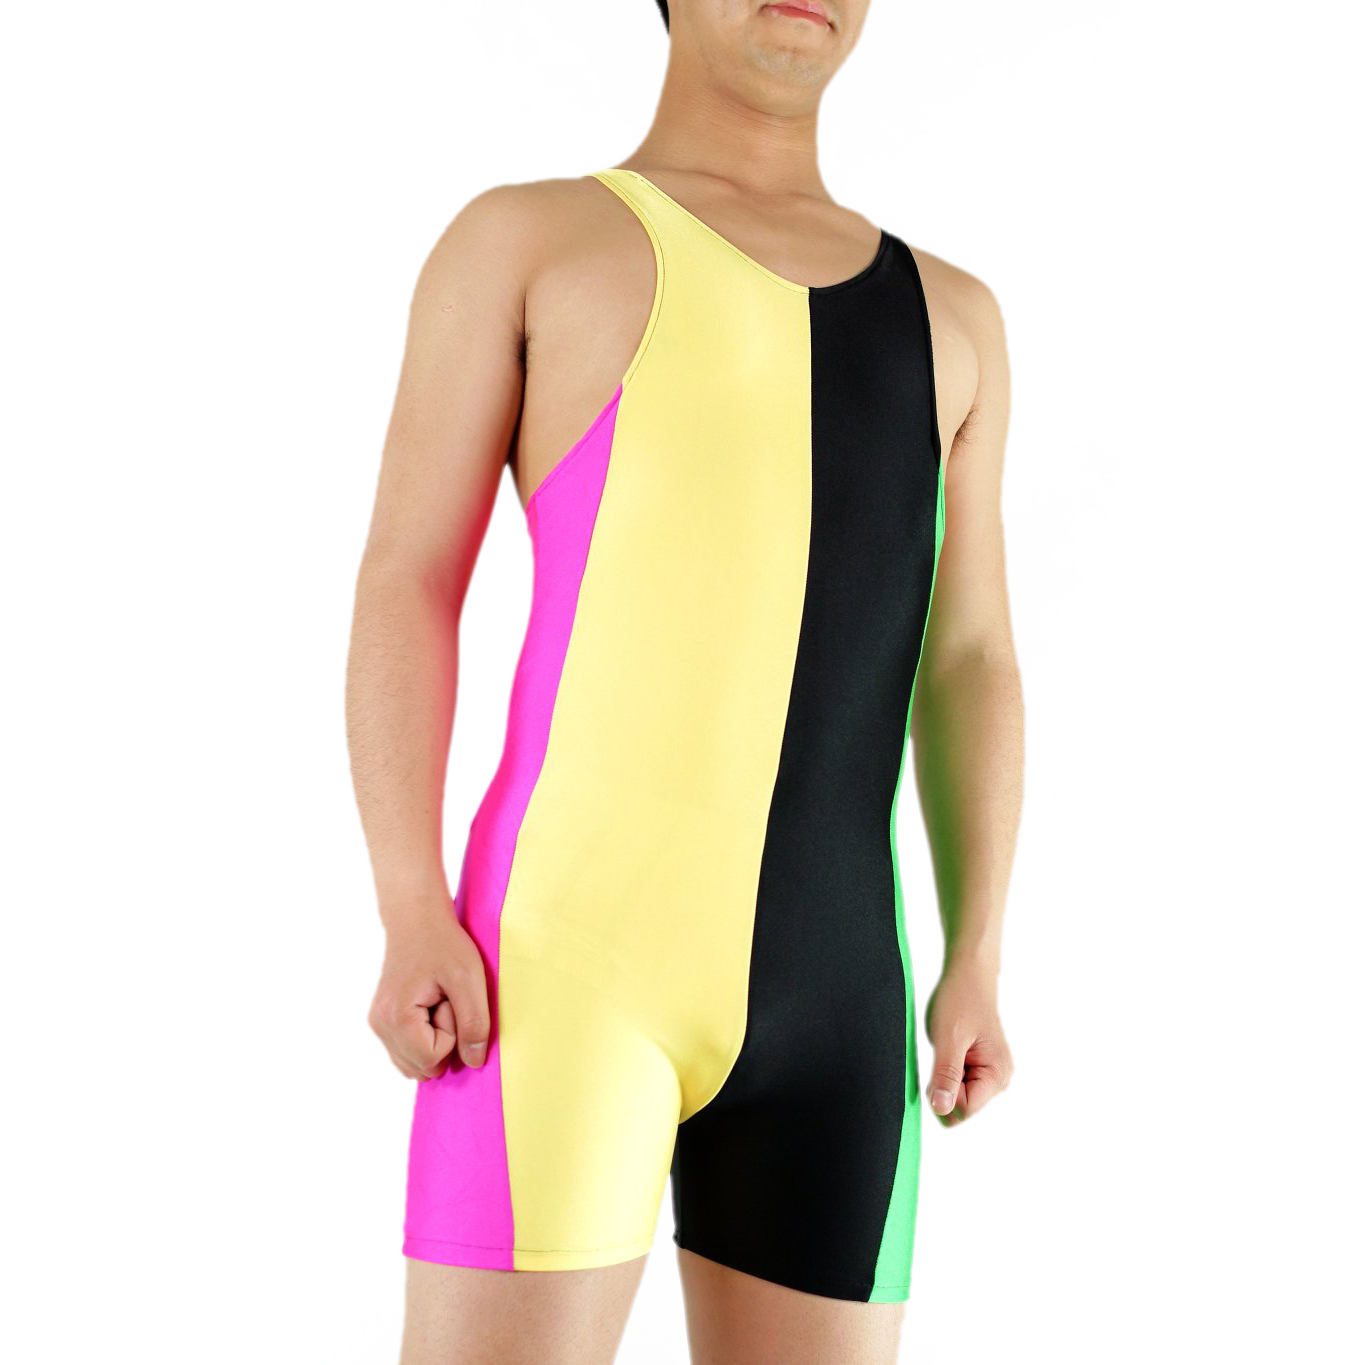 Men's Jumpsuit-styled Multicolor Lycra Spandex Sleeveless Catsui